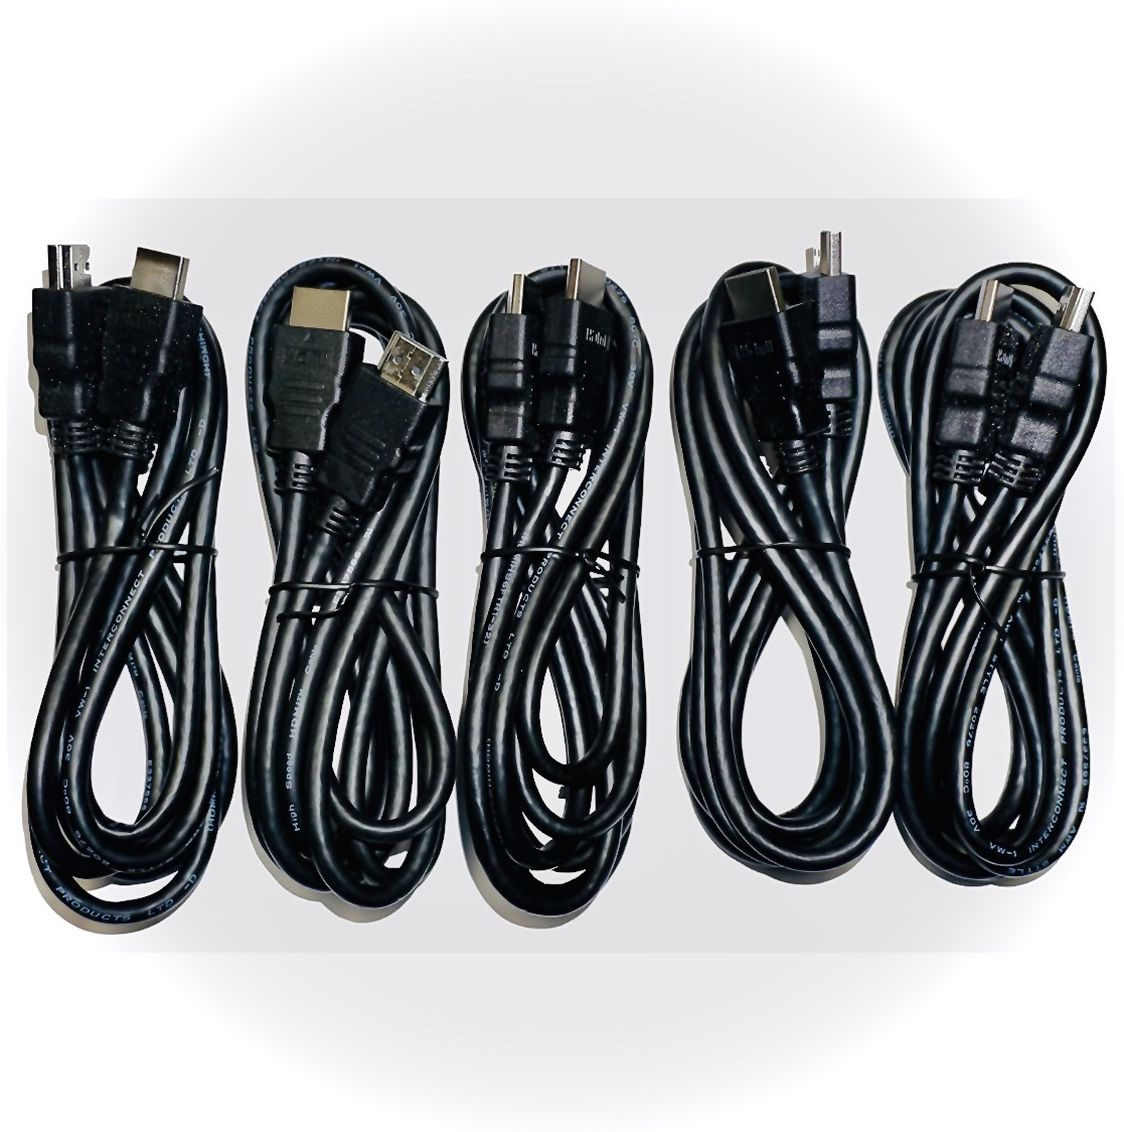 WIESON High Speed 6FT HDMI Cable ~Multipack~